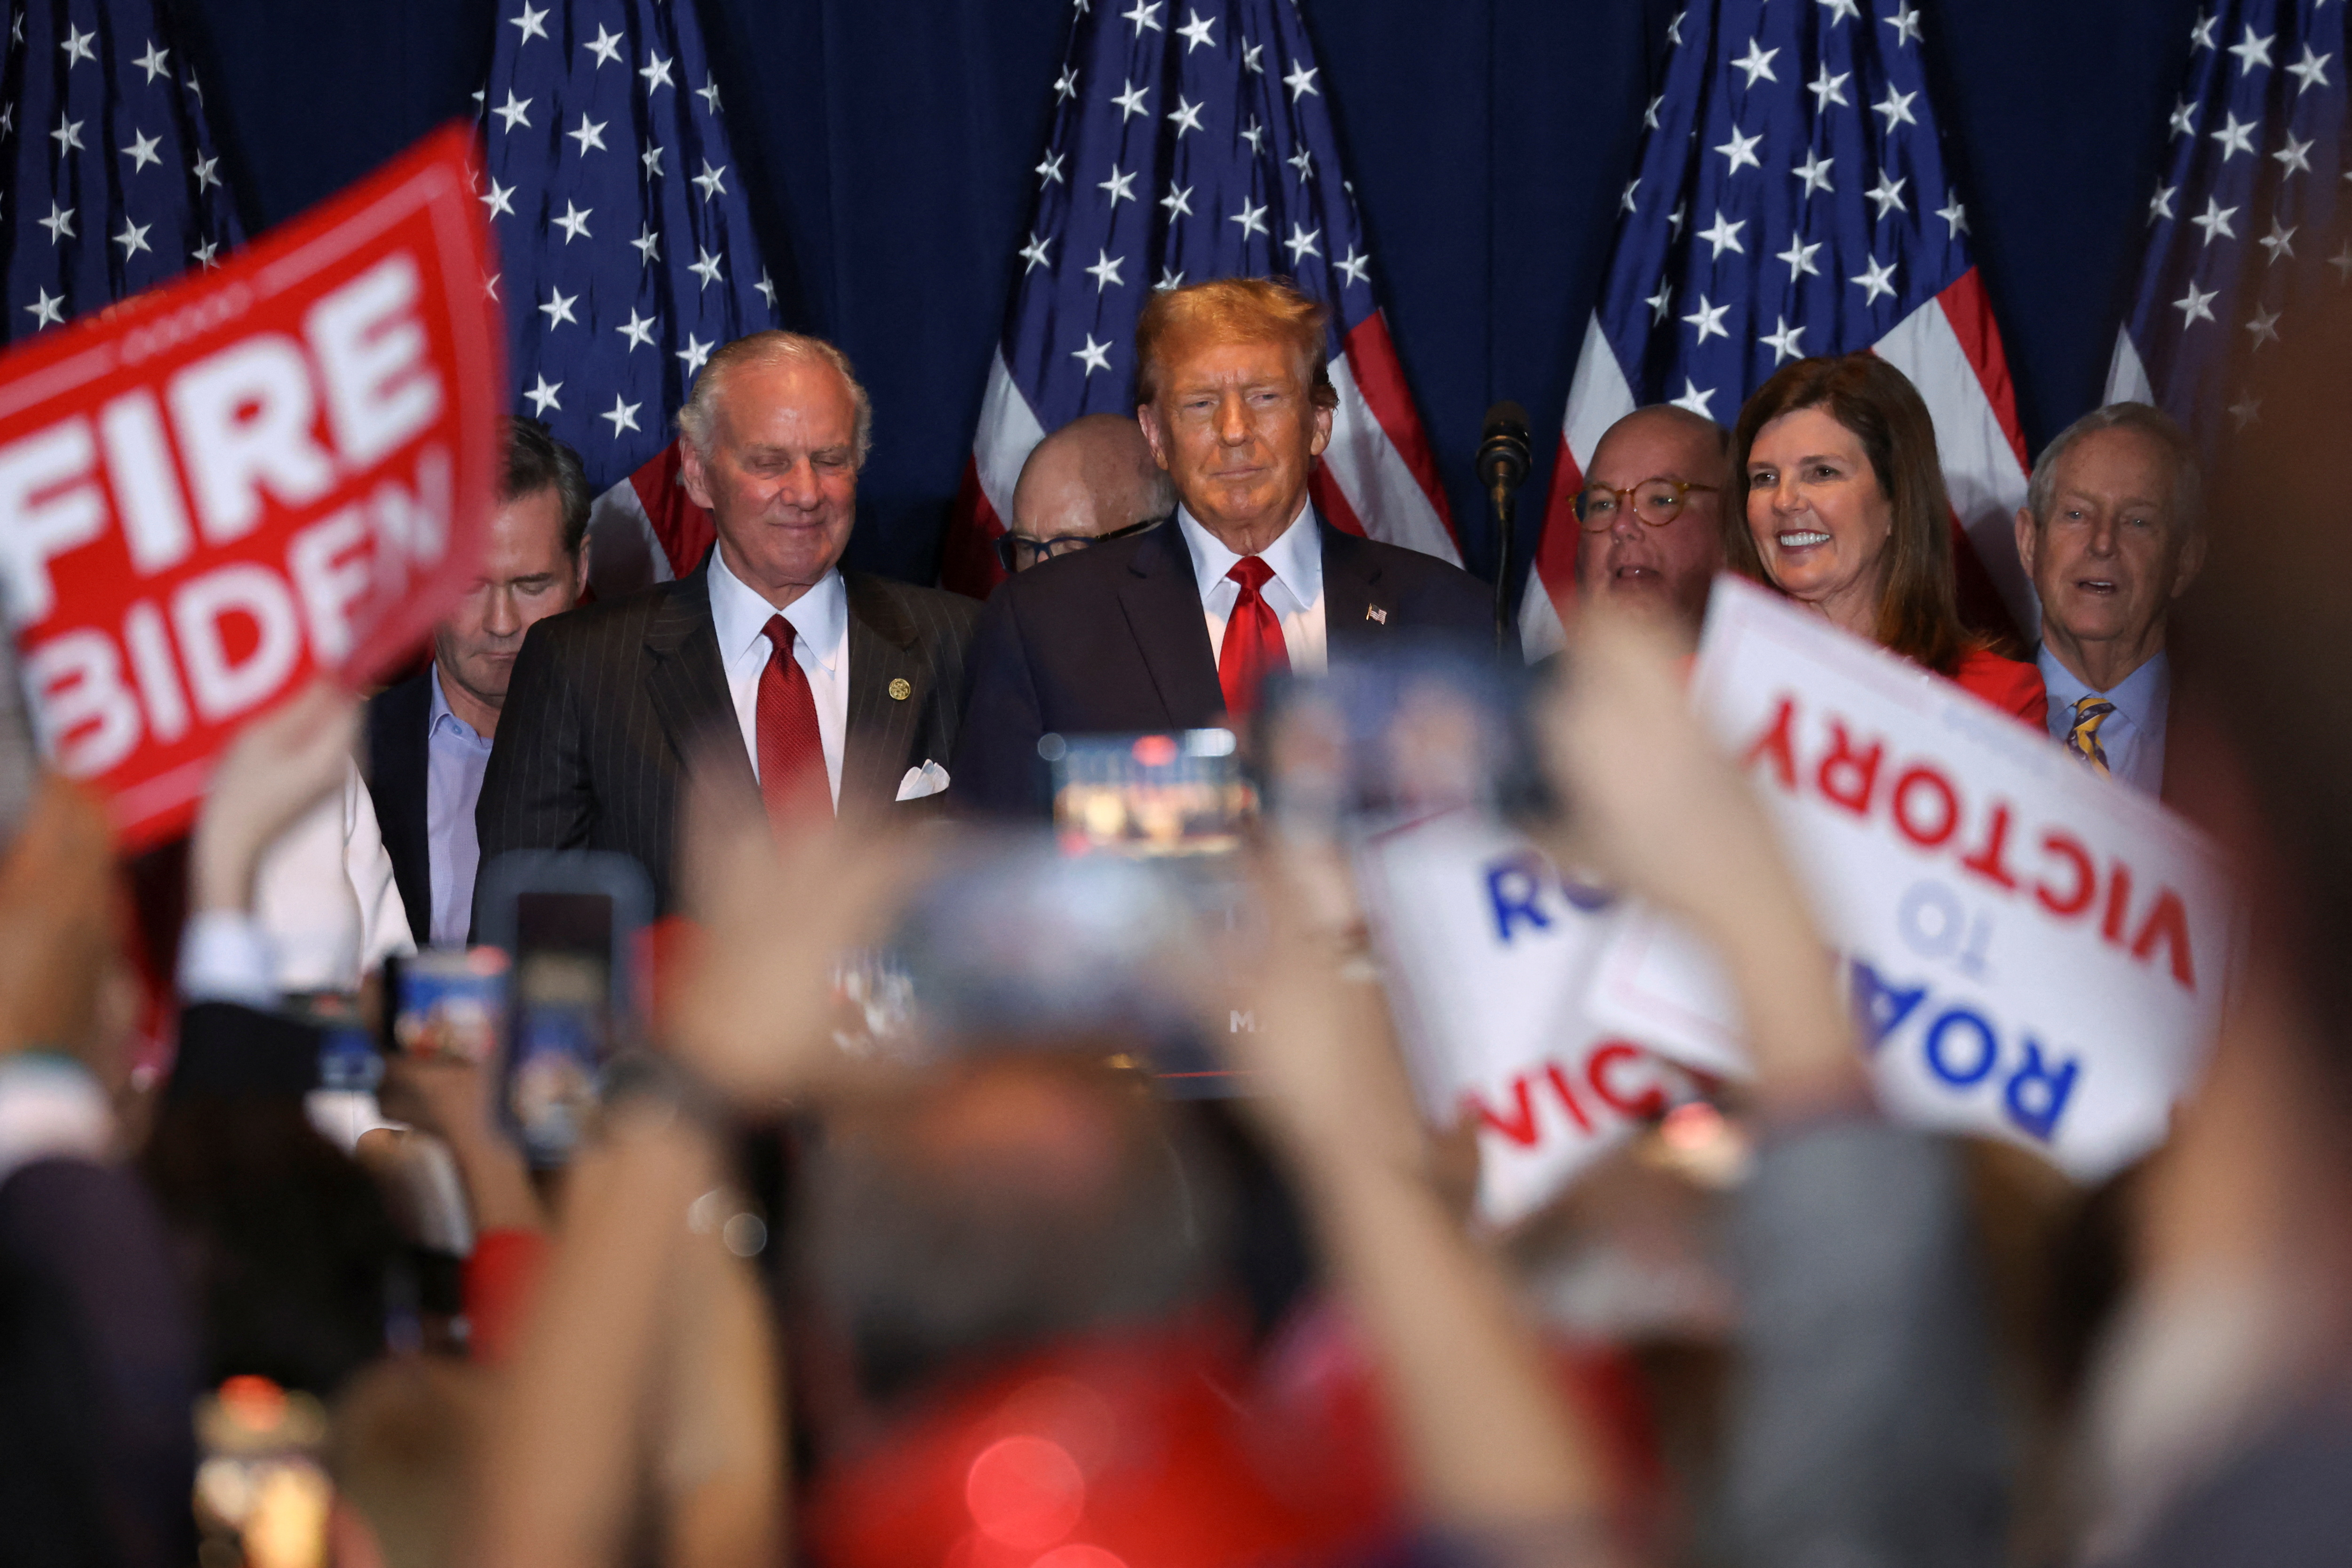 Republican presidential candidate and former U.S. President Trump hosts a South Carolina Republican presidential primary election night party in Columbia